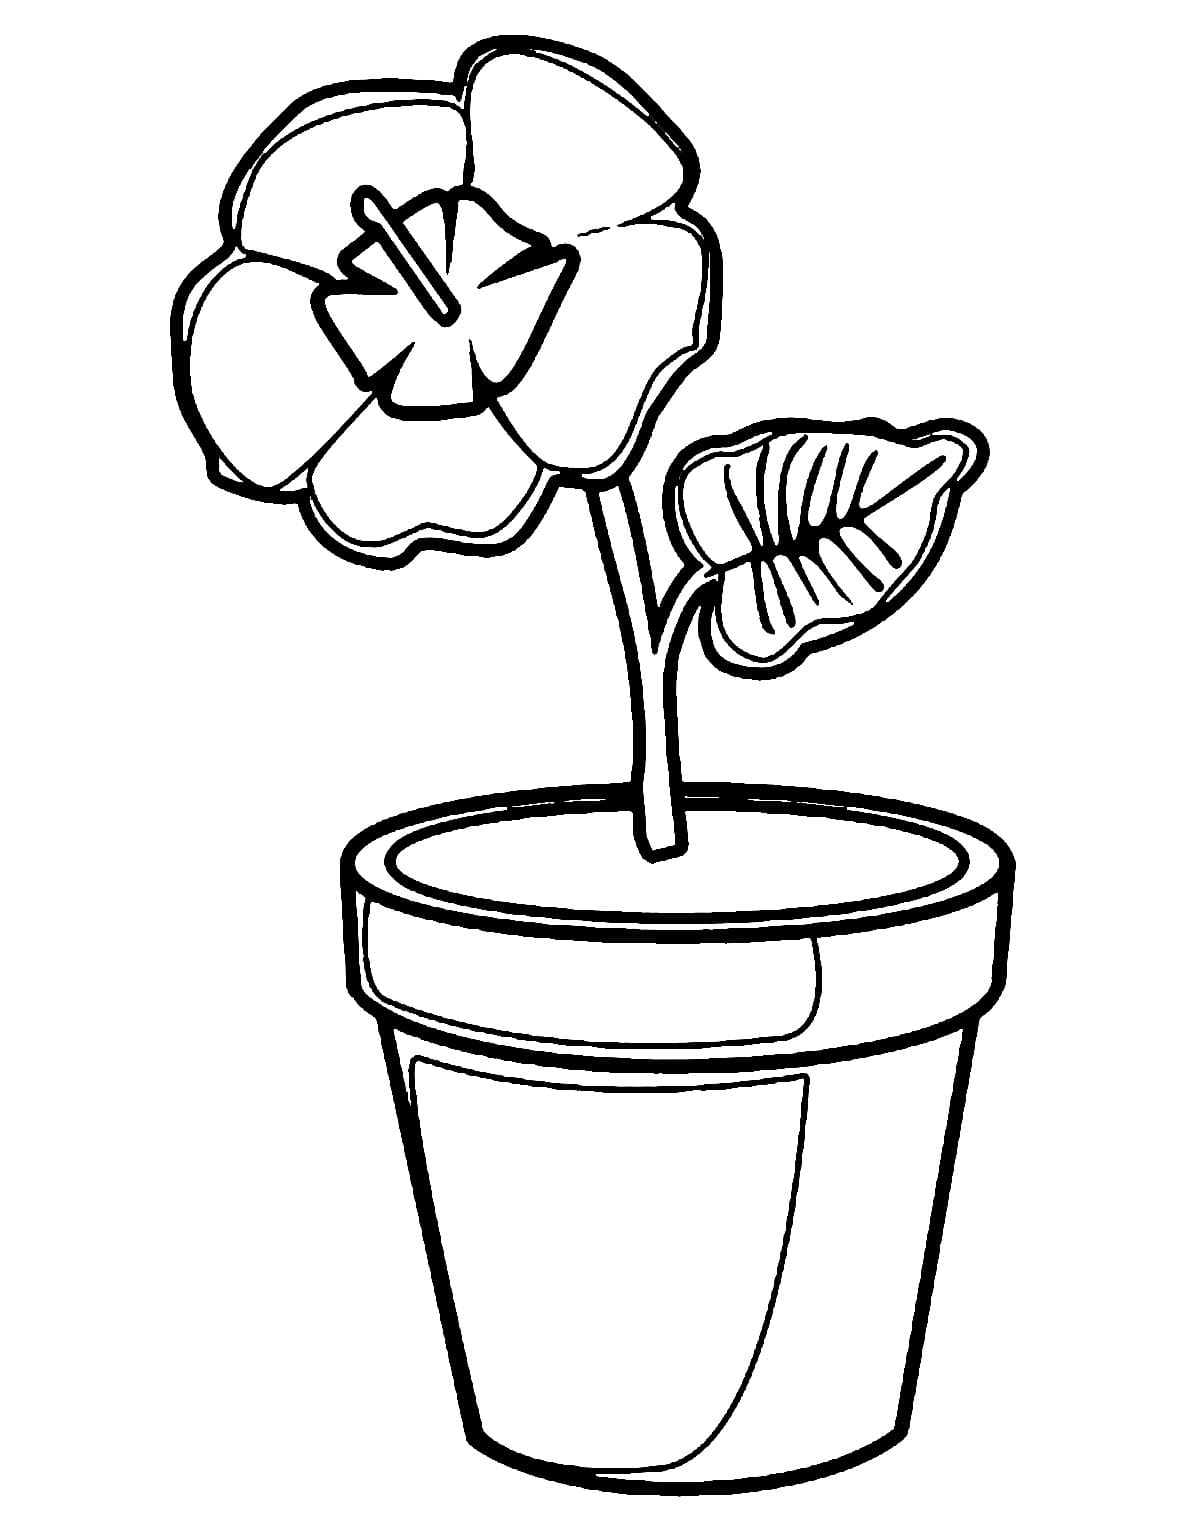 Flower Pot Printable For Kids coloring page - Download, Print or Color ...